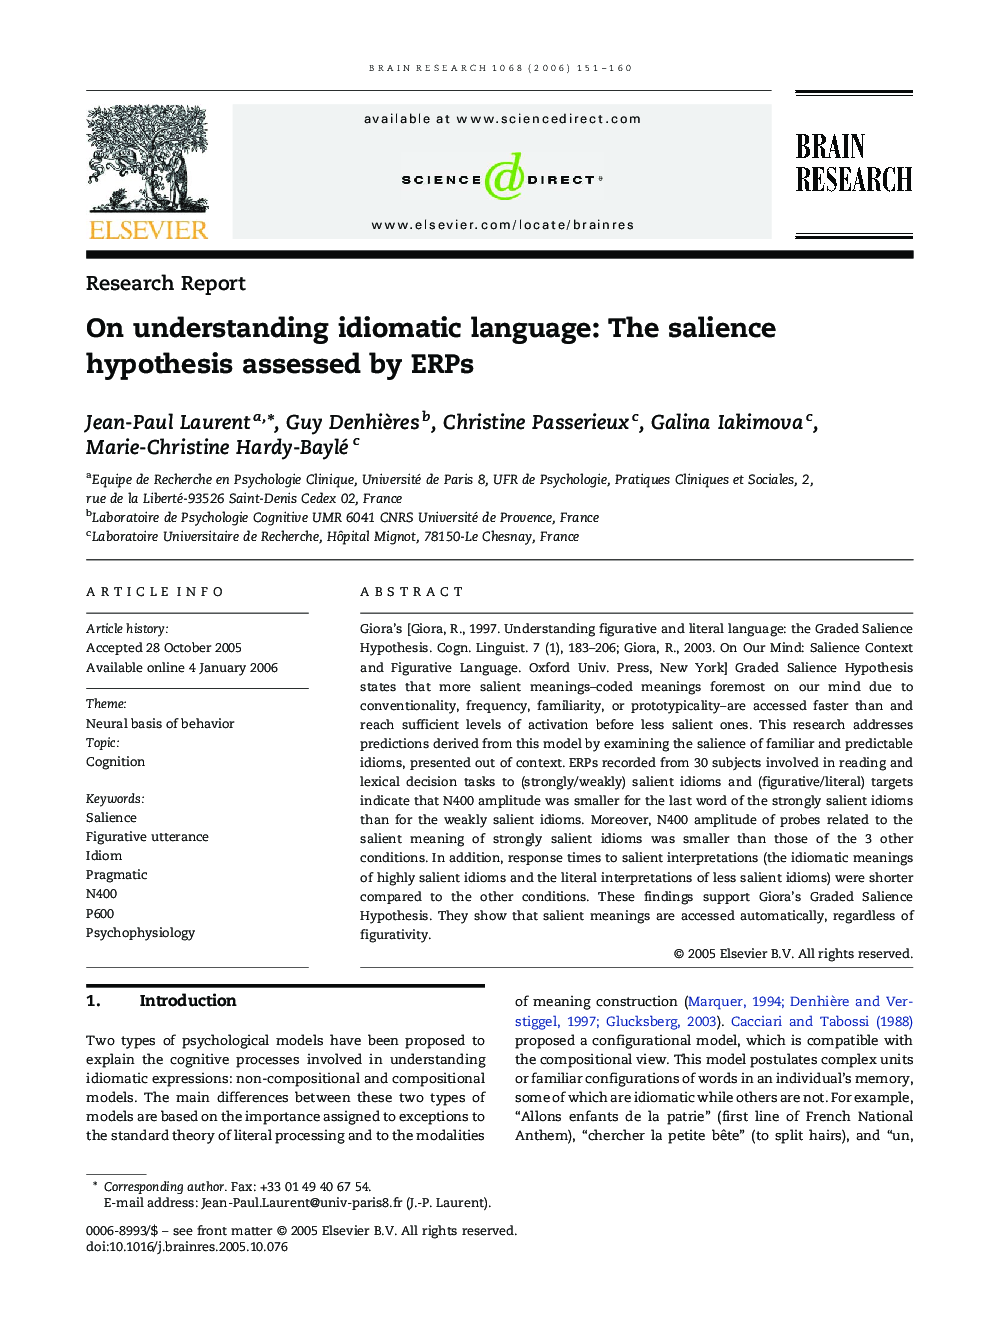 On understanding idiomatic language: The salience hypothesis assessed by ERPs